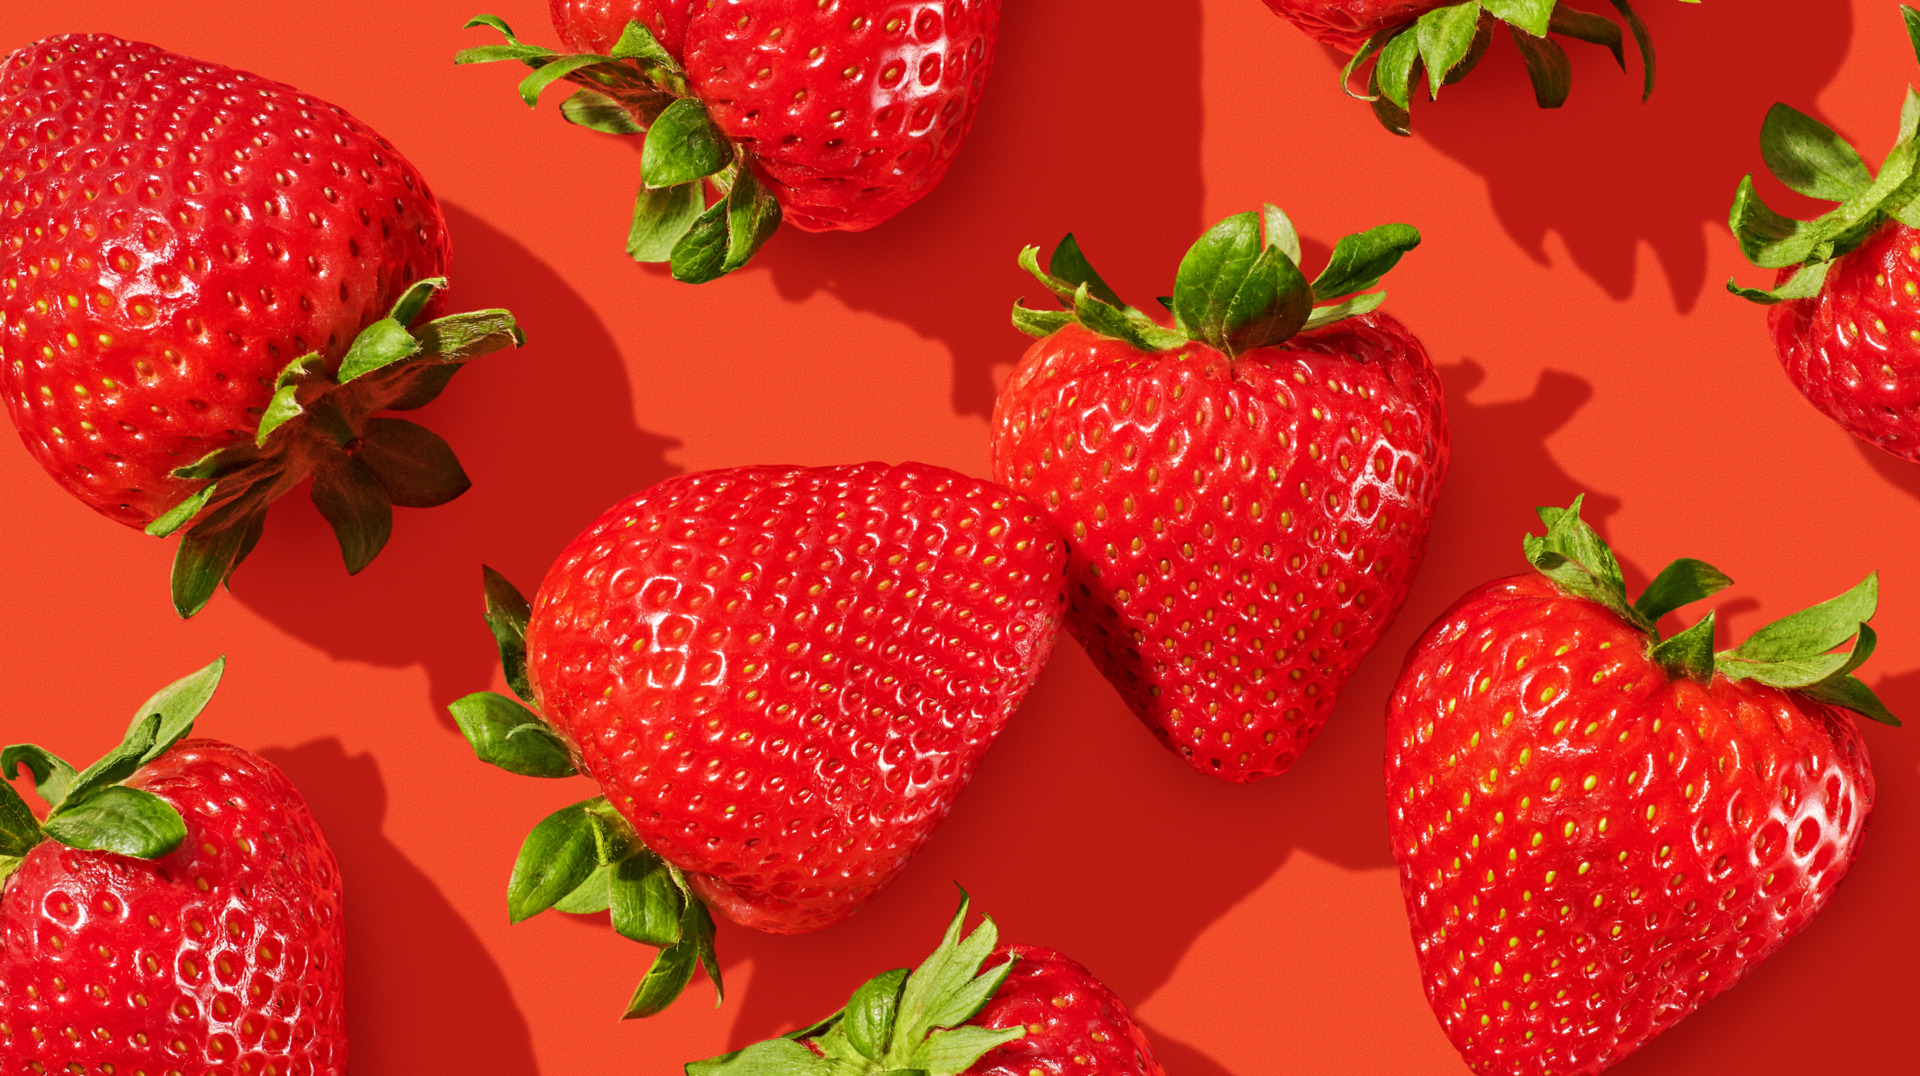 Image of Always Fresh strawberries with a red background